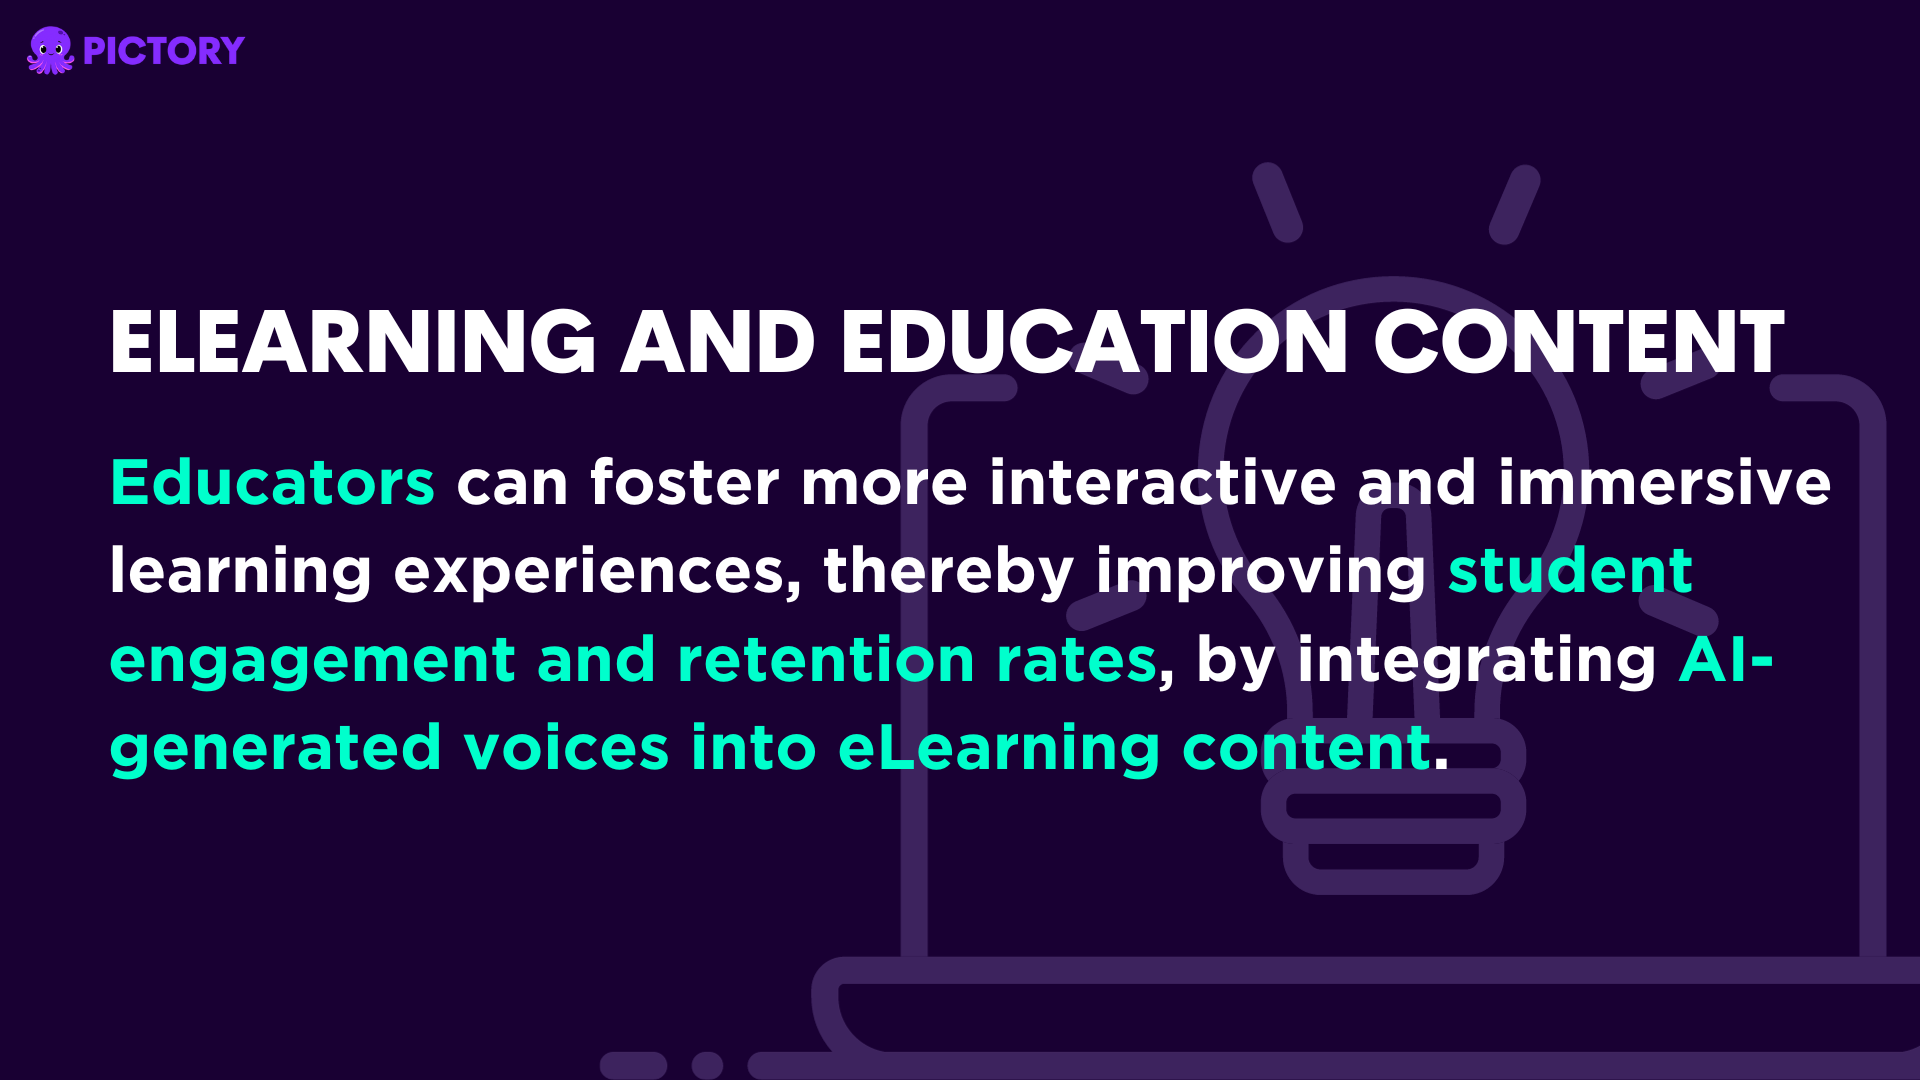 eLearning and Educational Content, AI-generated voices can significantly enhance the learning experience infographic